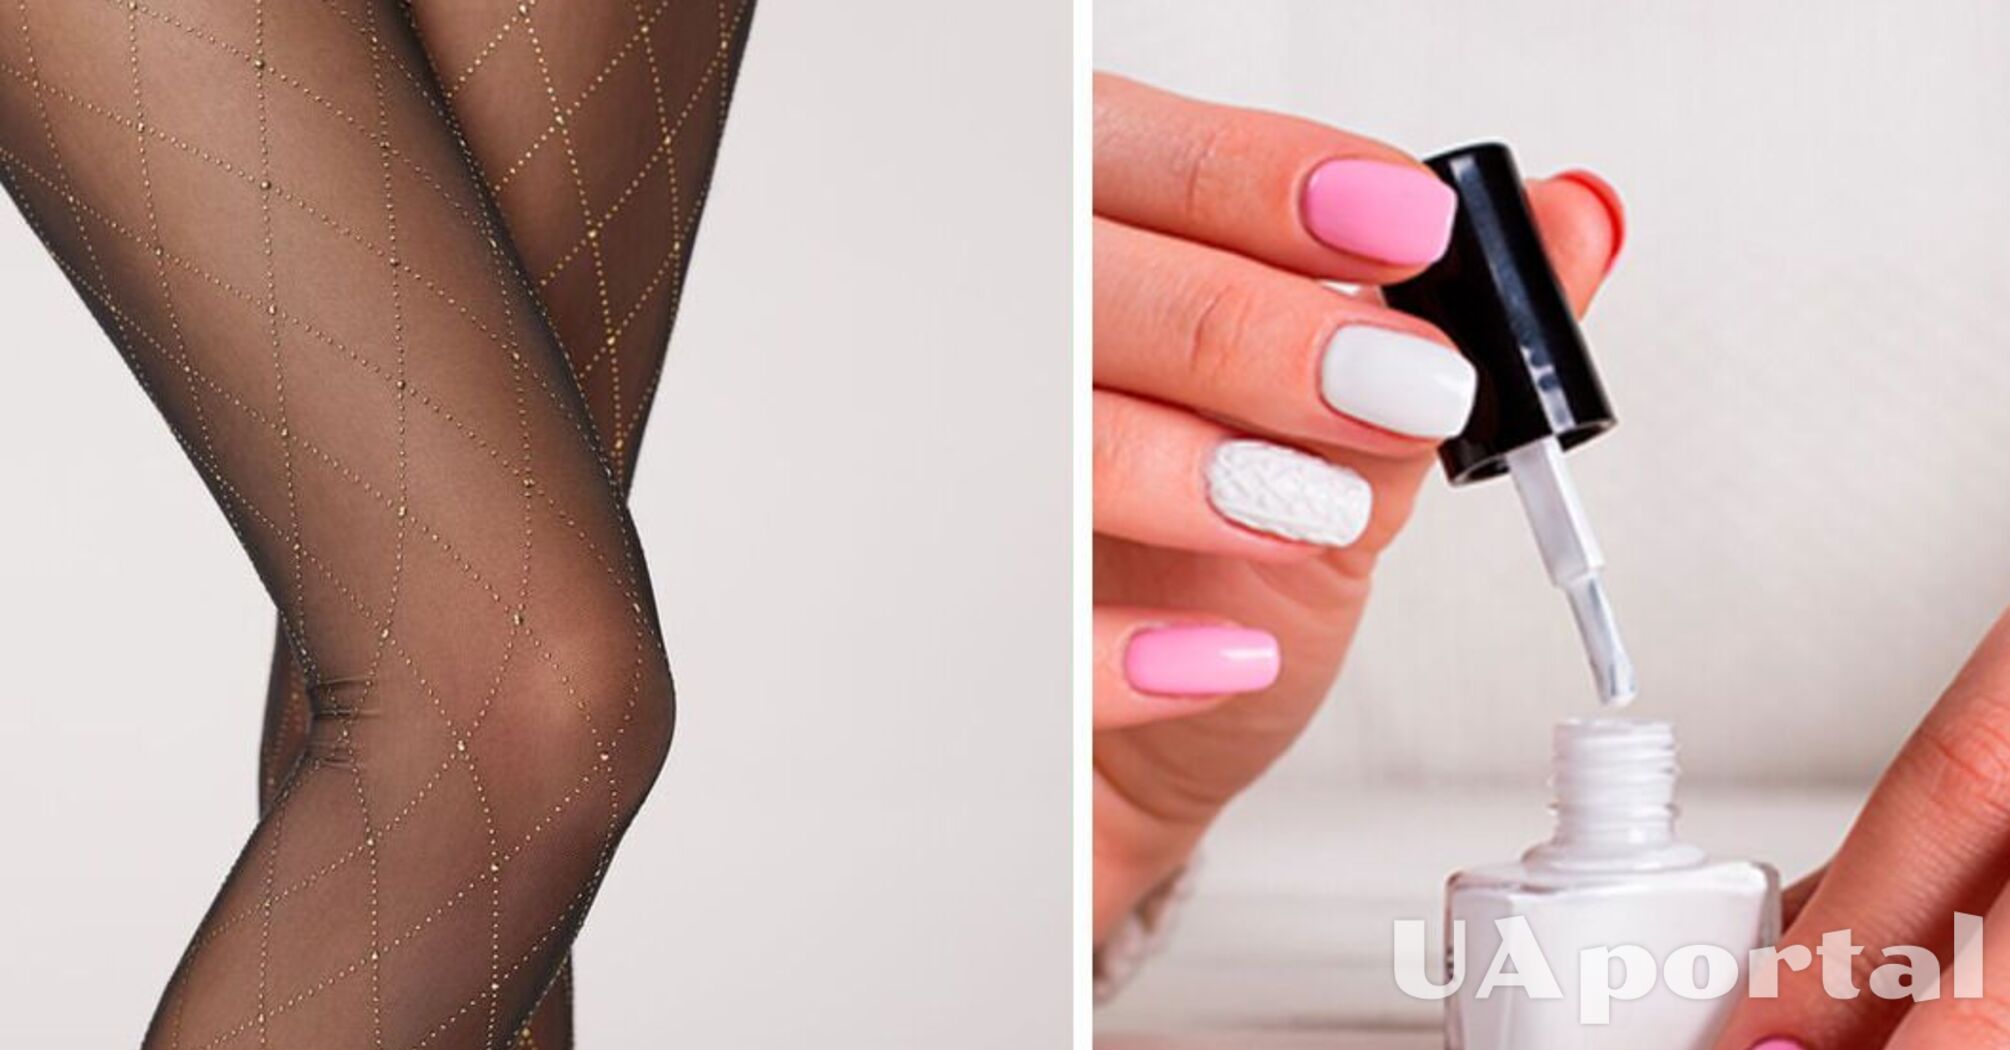 How to save torn nylon tights: effective life hacks from fashionistas